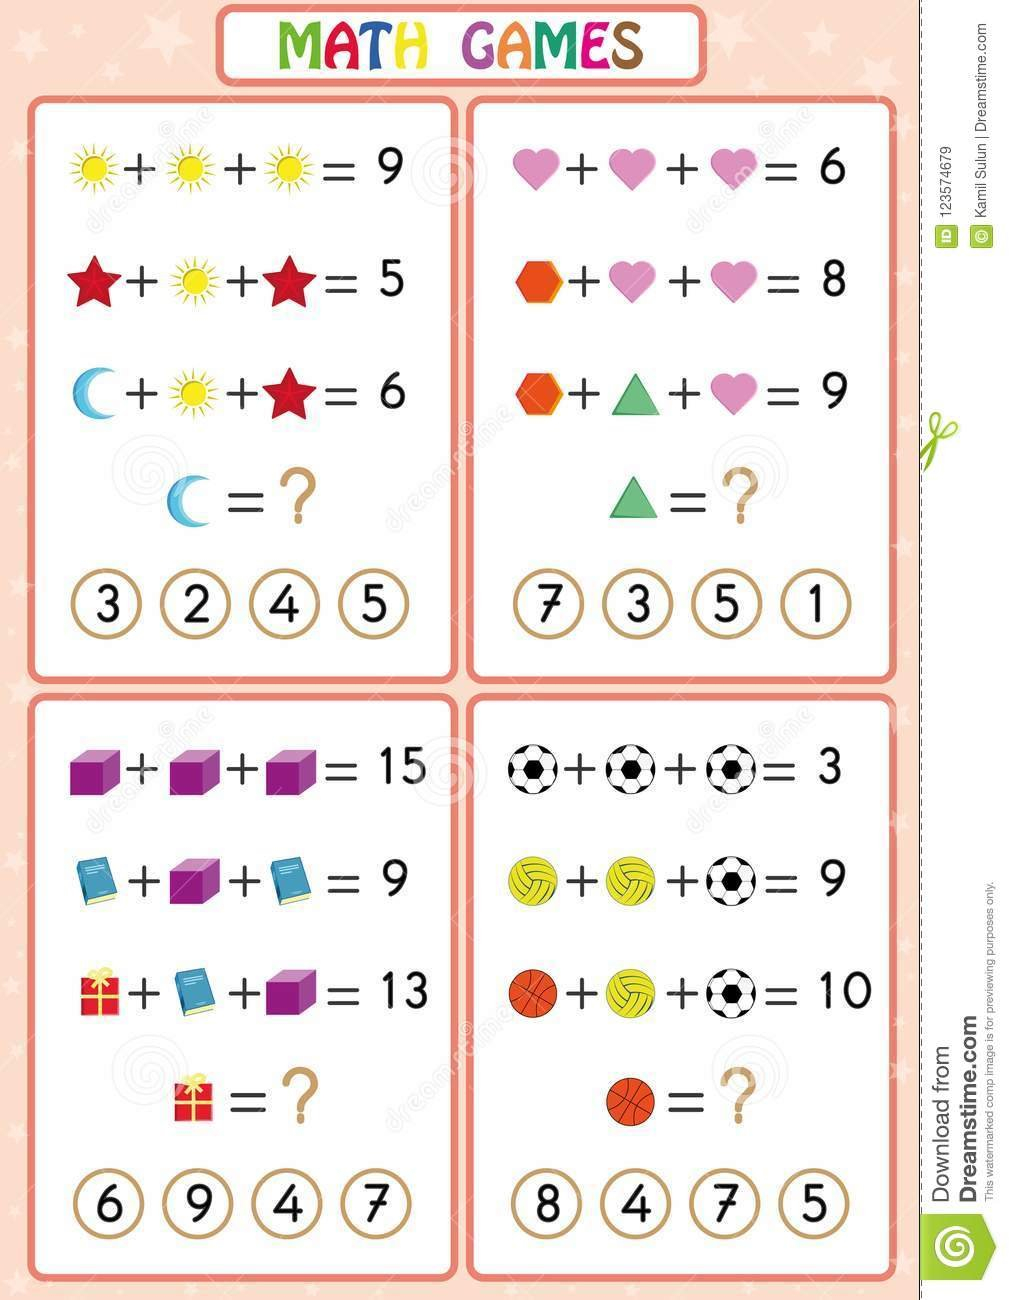 Mathematics Educational Game For Kids Fun Worksheets For Children Along With Educational Worksheets For Kids